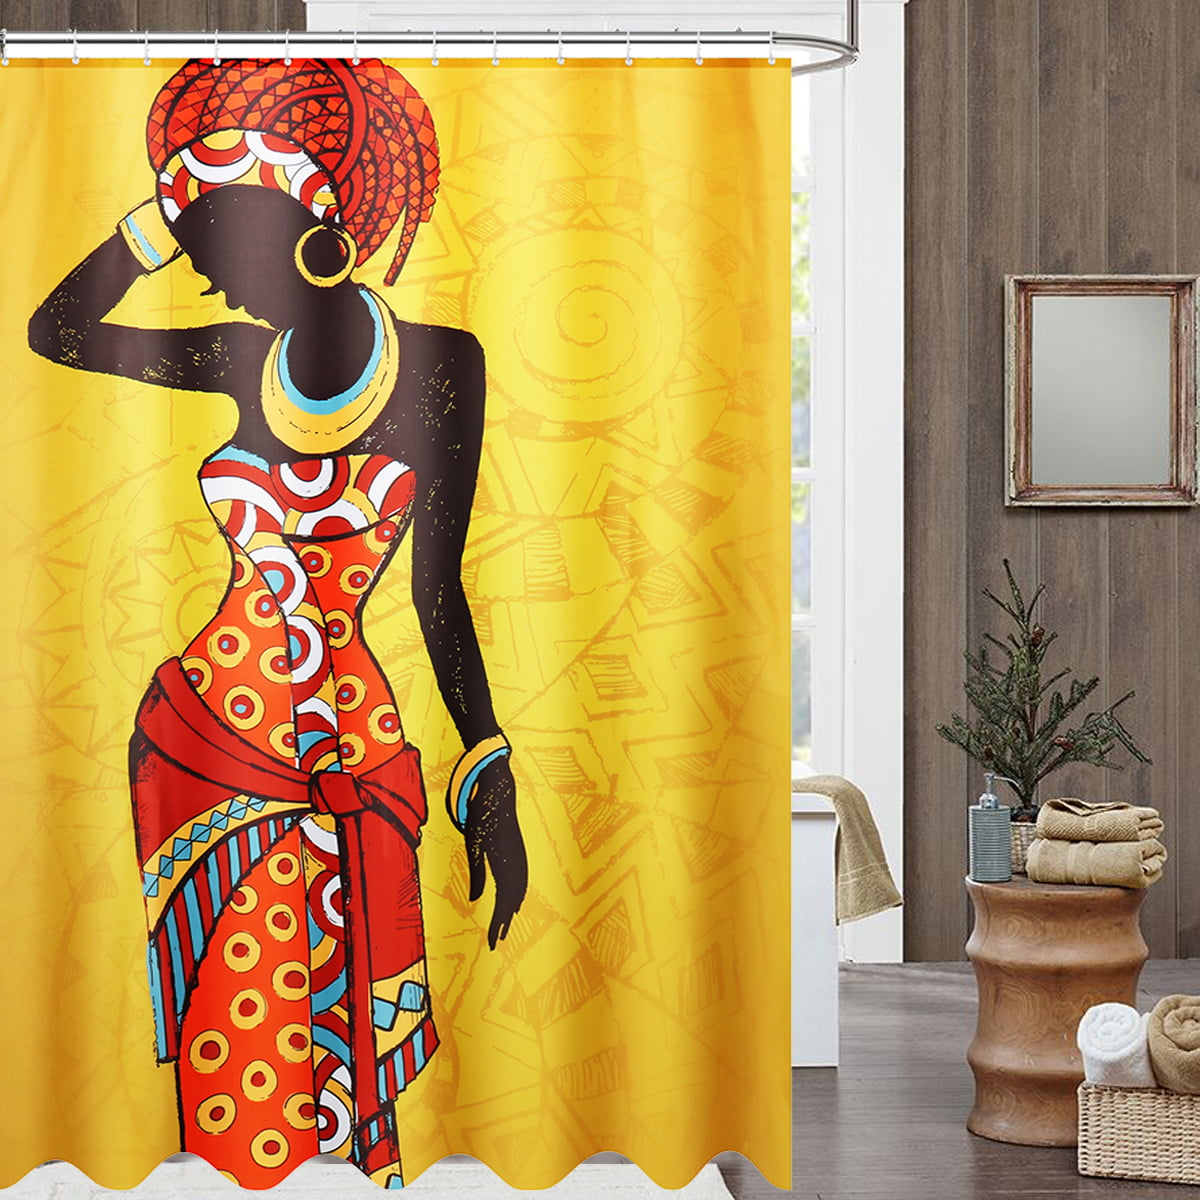 Afro Female Shower Curtain Bathroom Hippie Waterproof Curtain Decor With Hook 